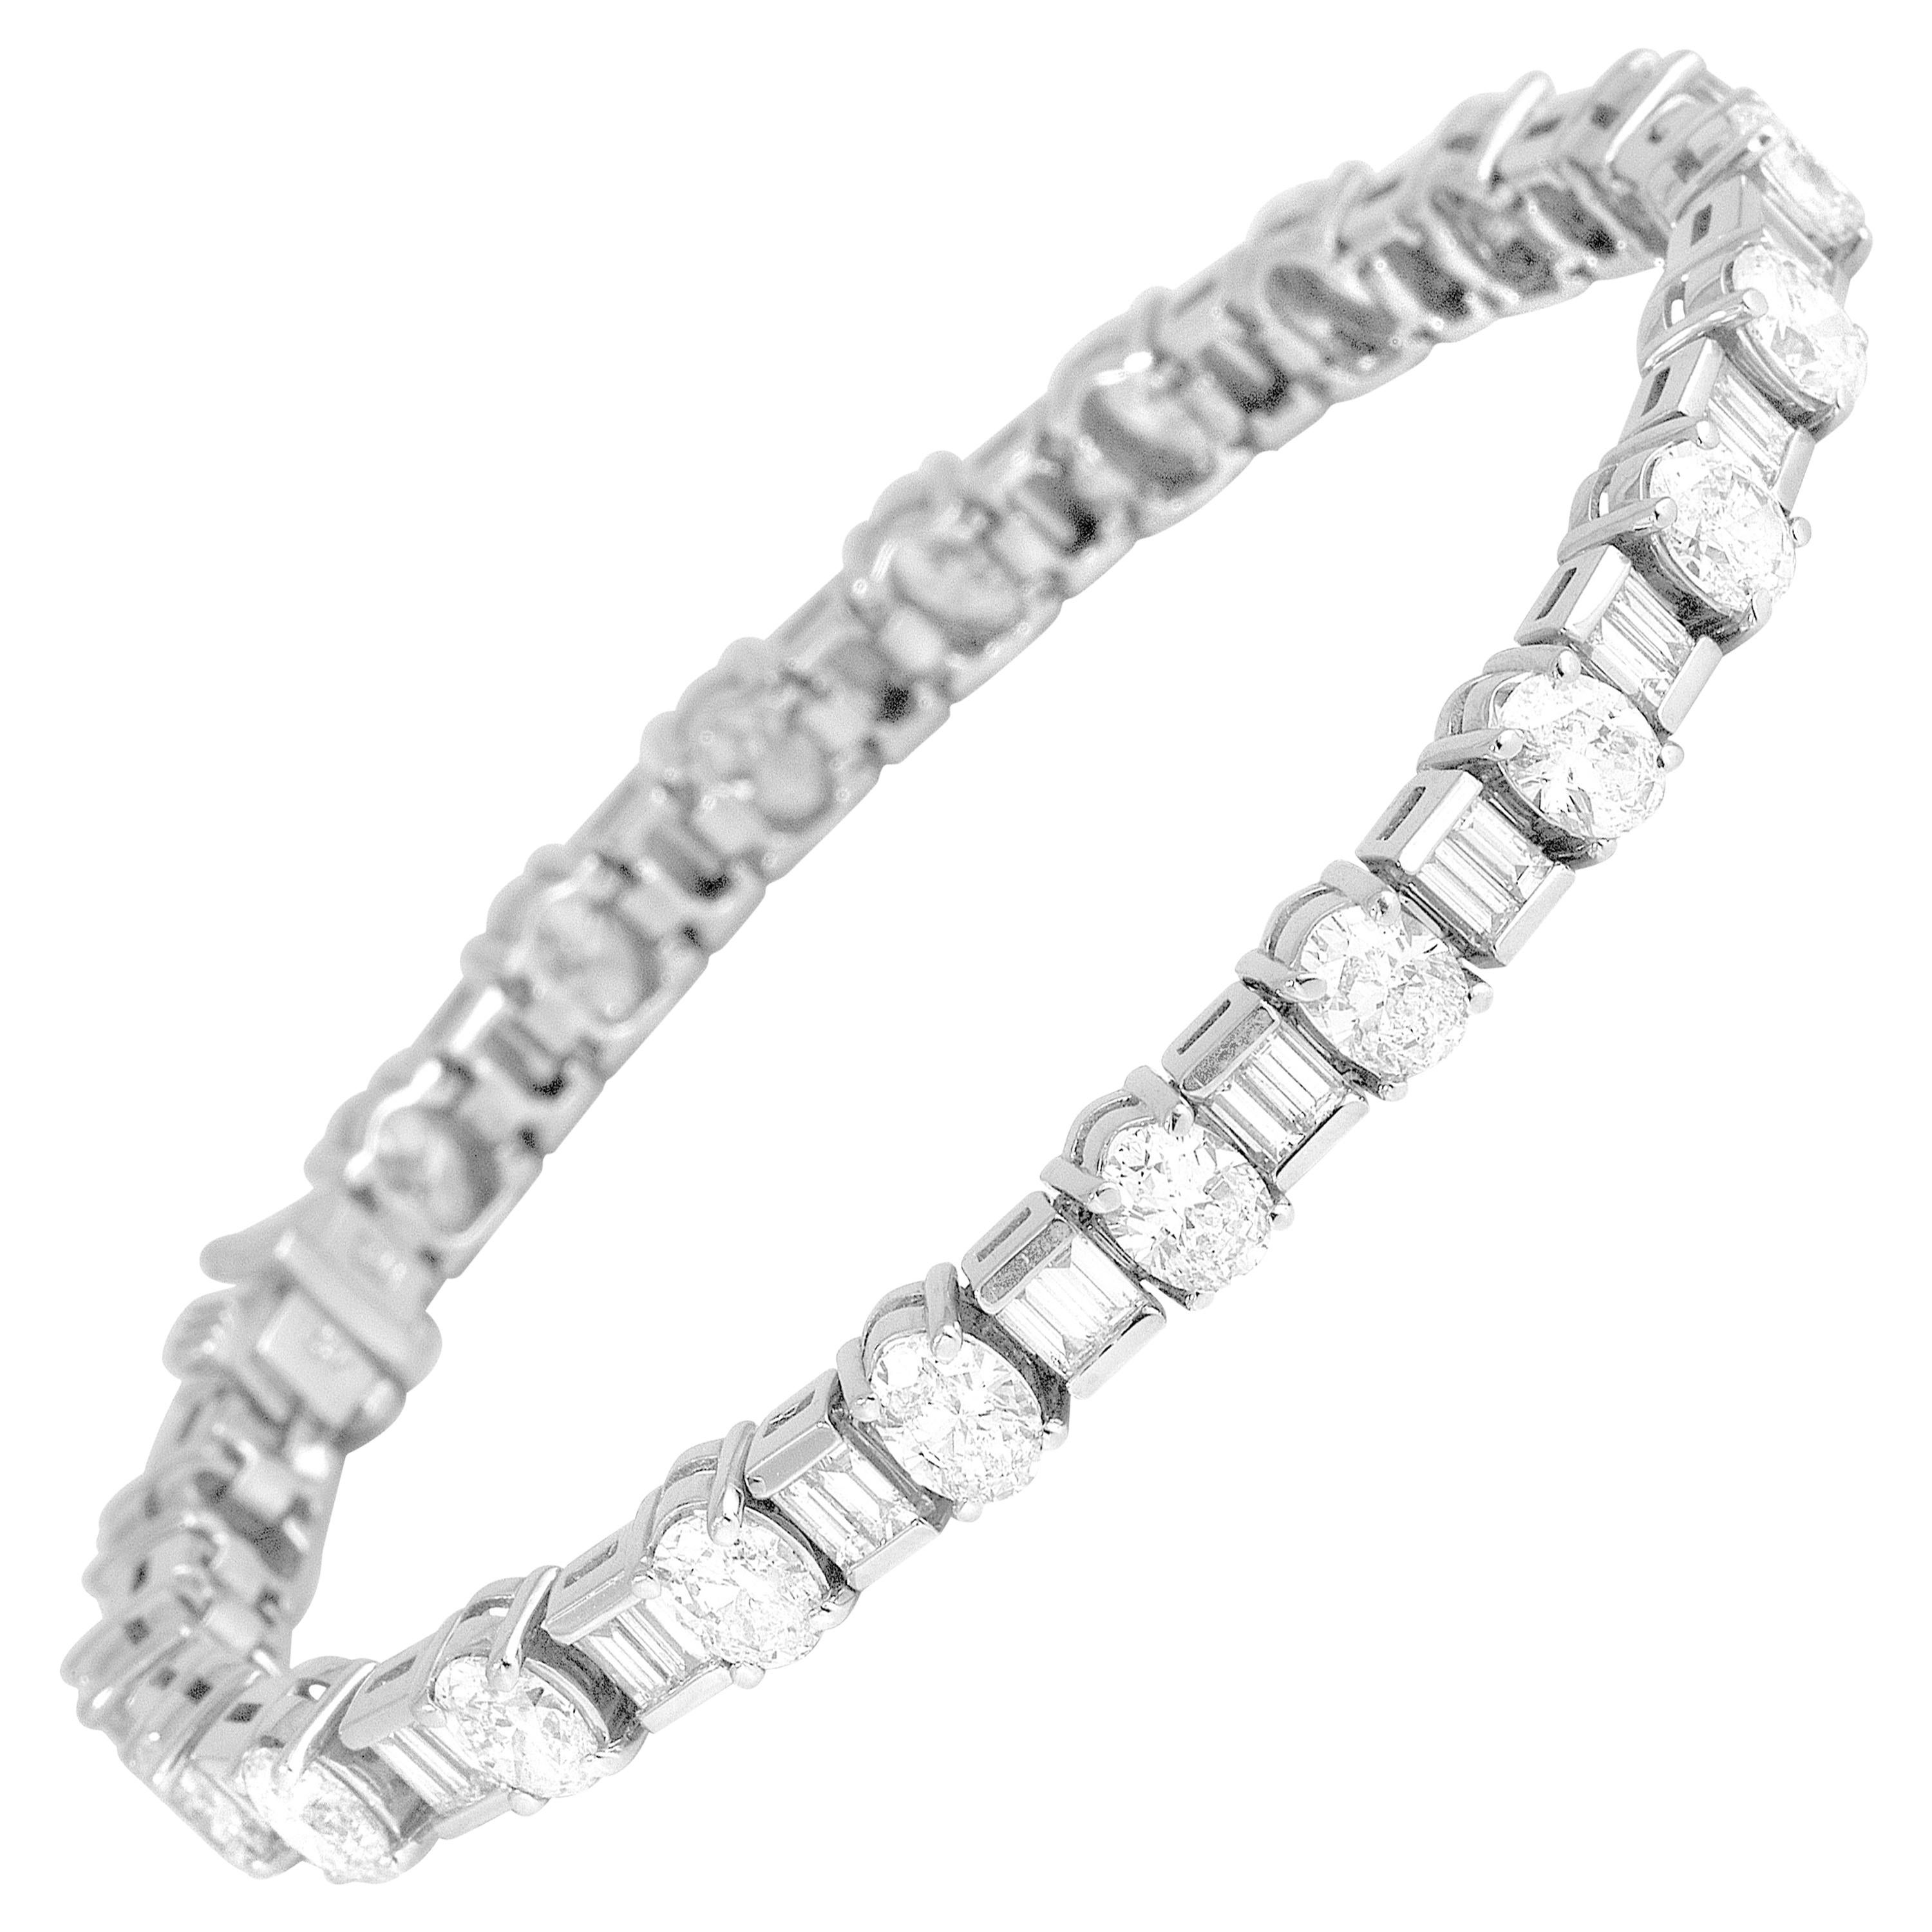 How can I tell if a diamond tennis bracelet is real?